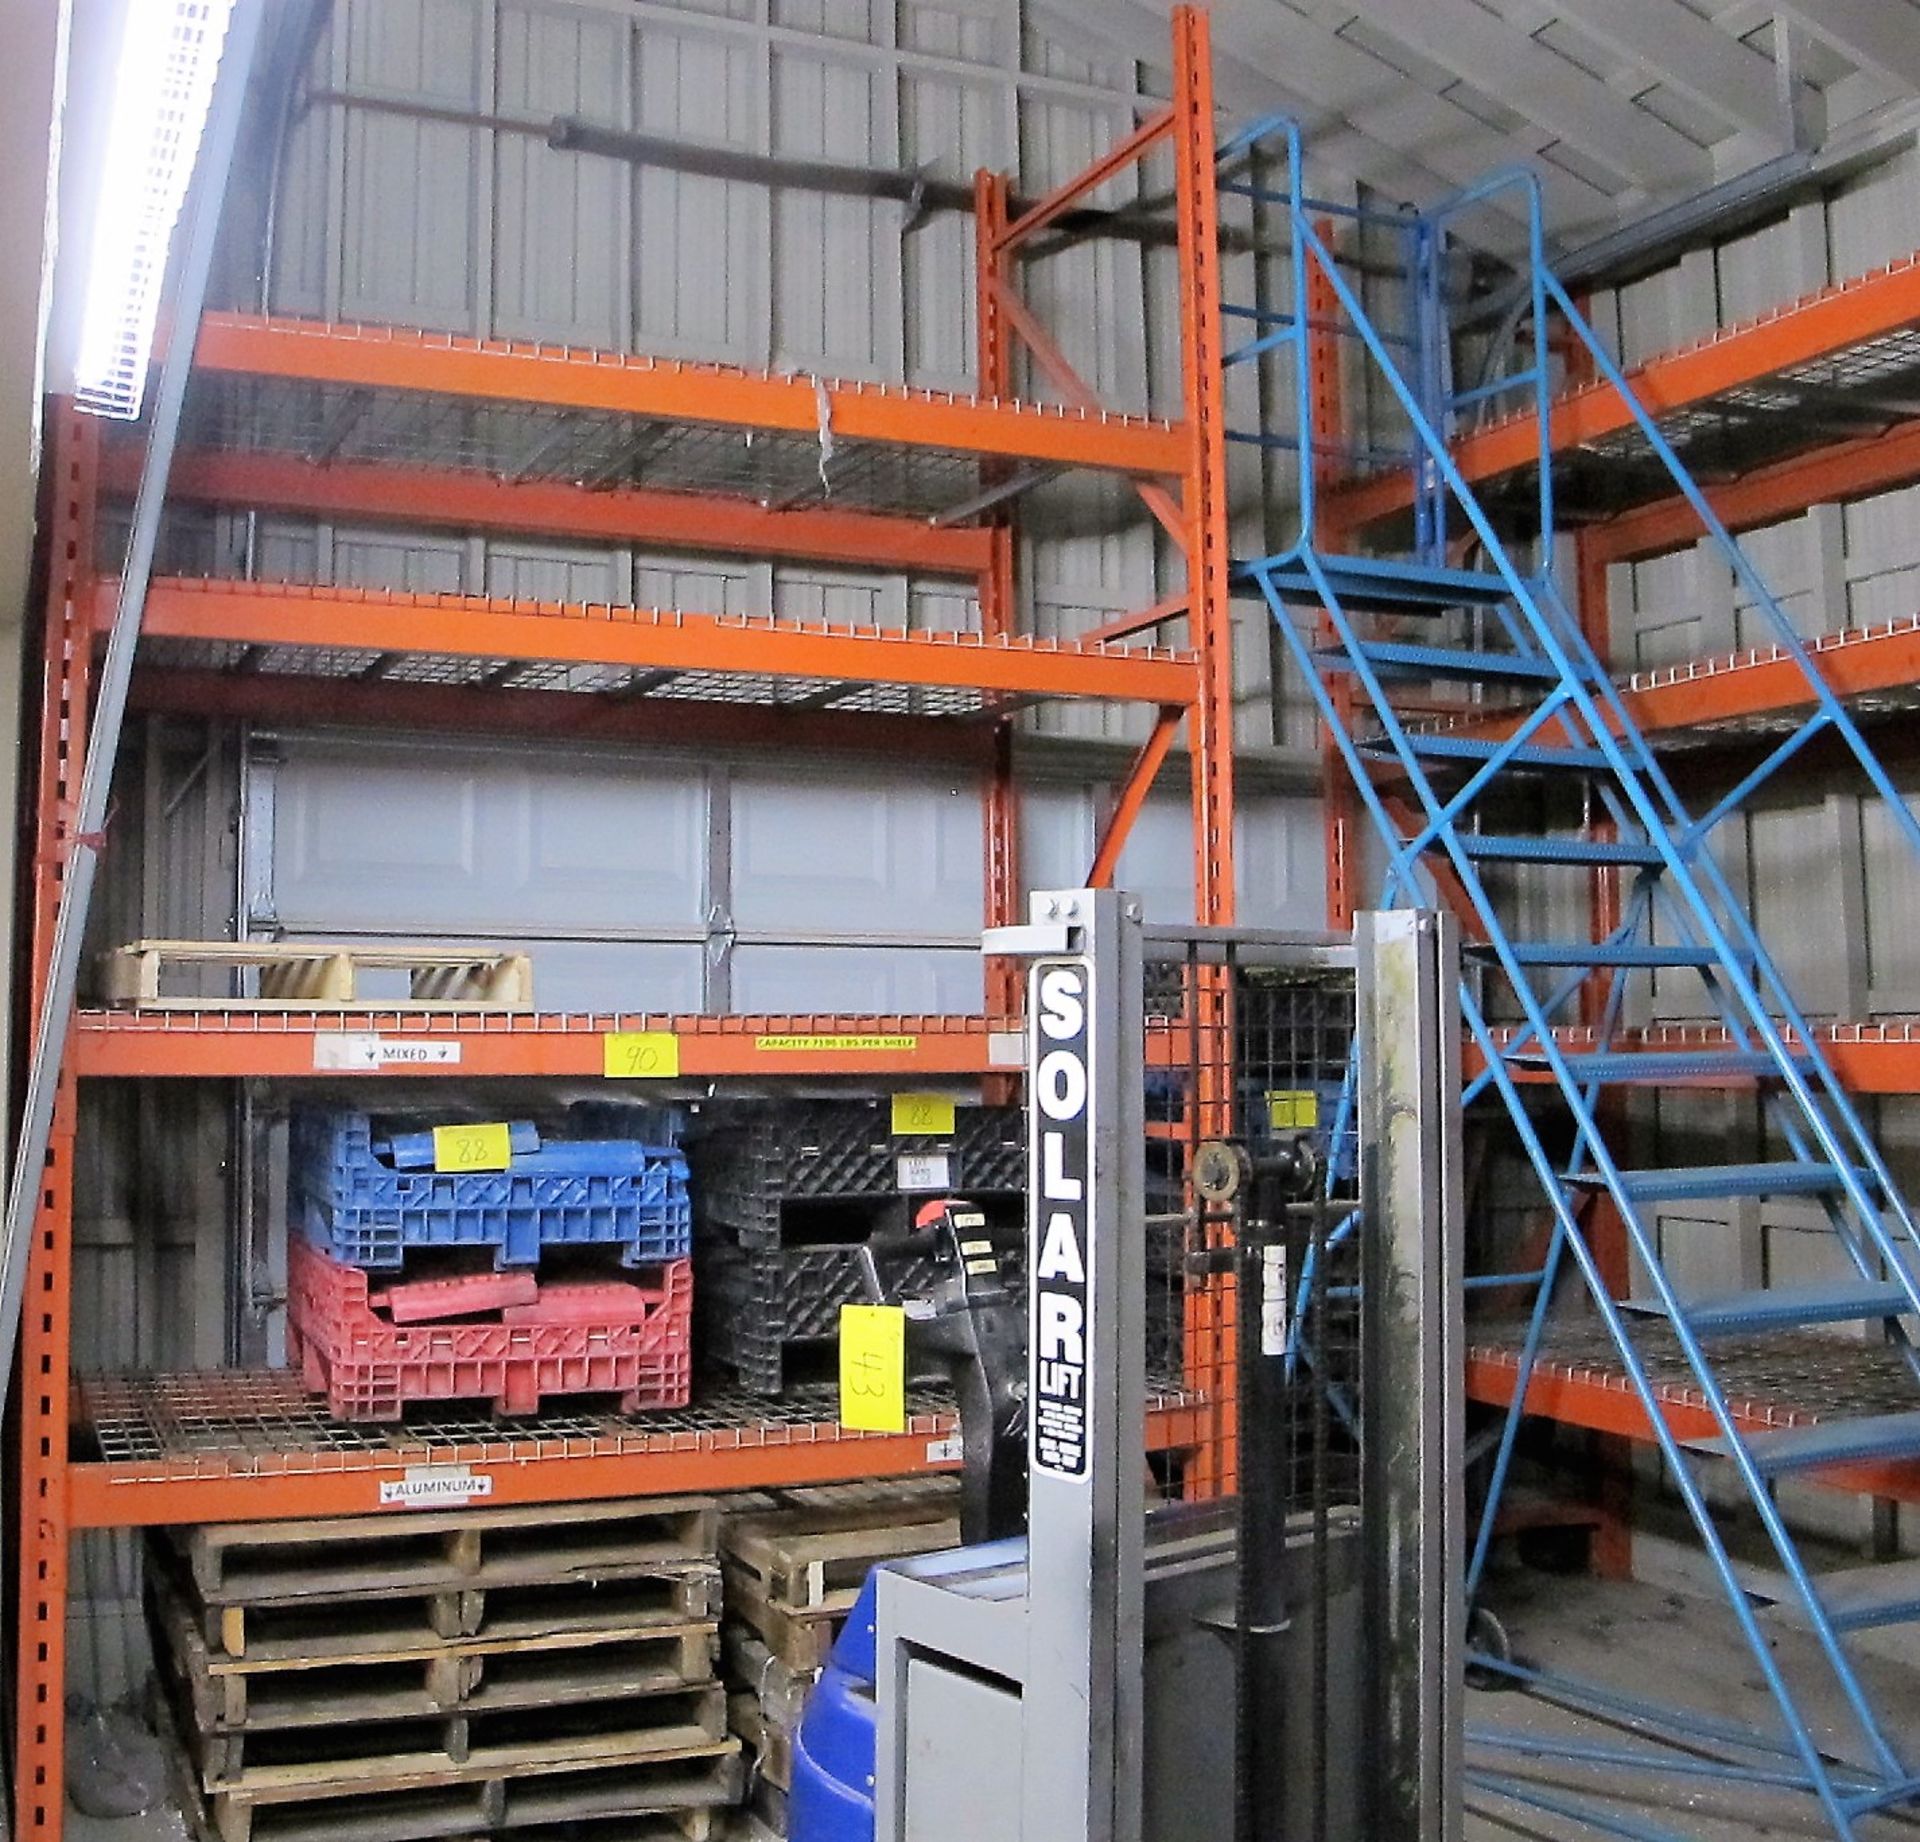 LOT OF 1 SECTIONS OF PALLET RACKING W/CAGE INSERT SHELVES (8'W X 12'T X 42"D PER SECTION)